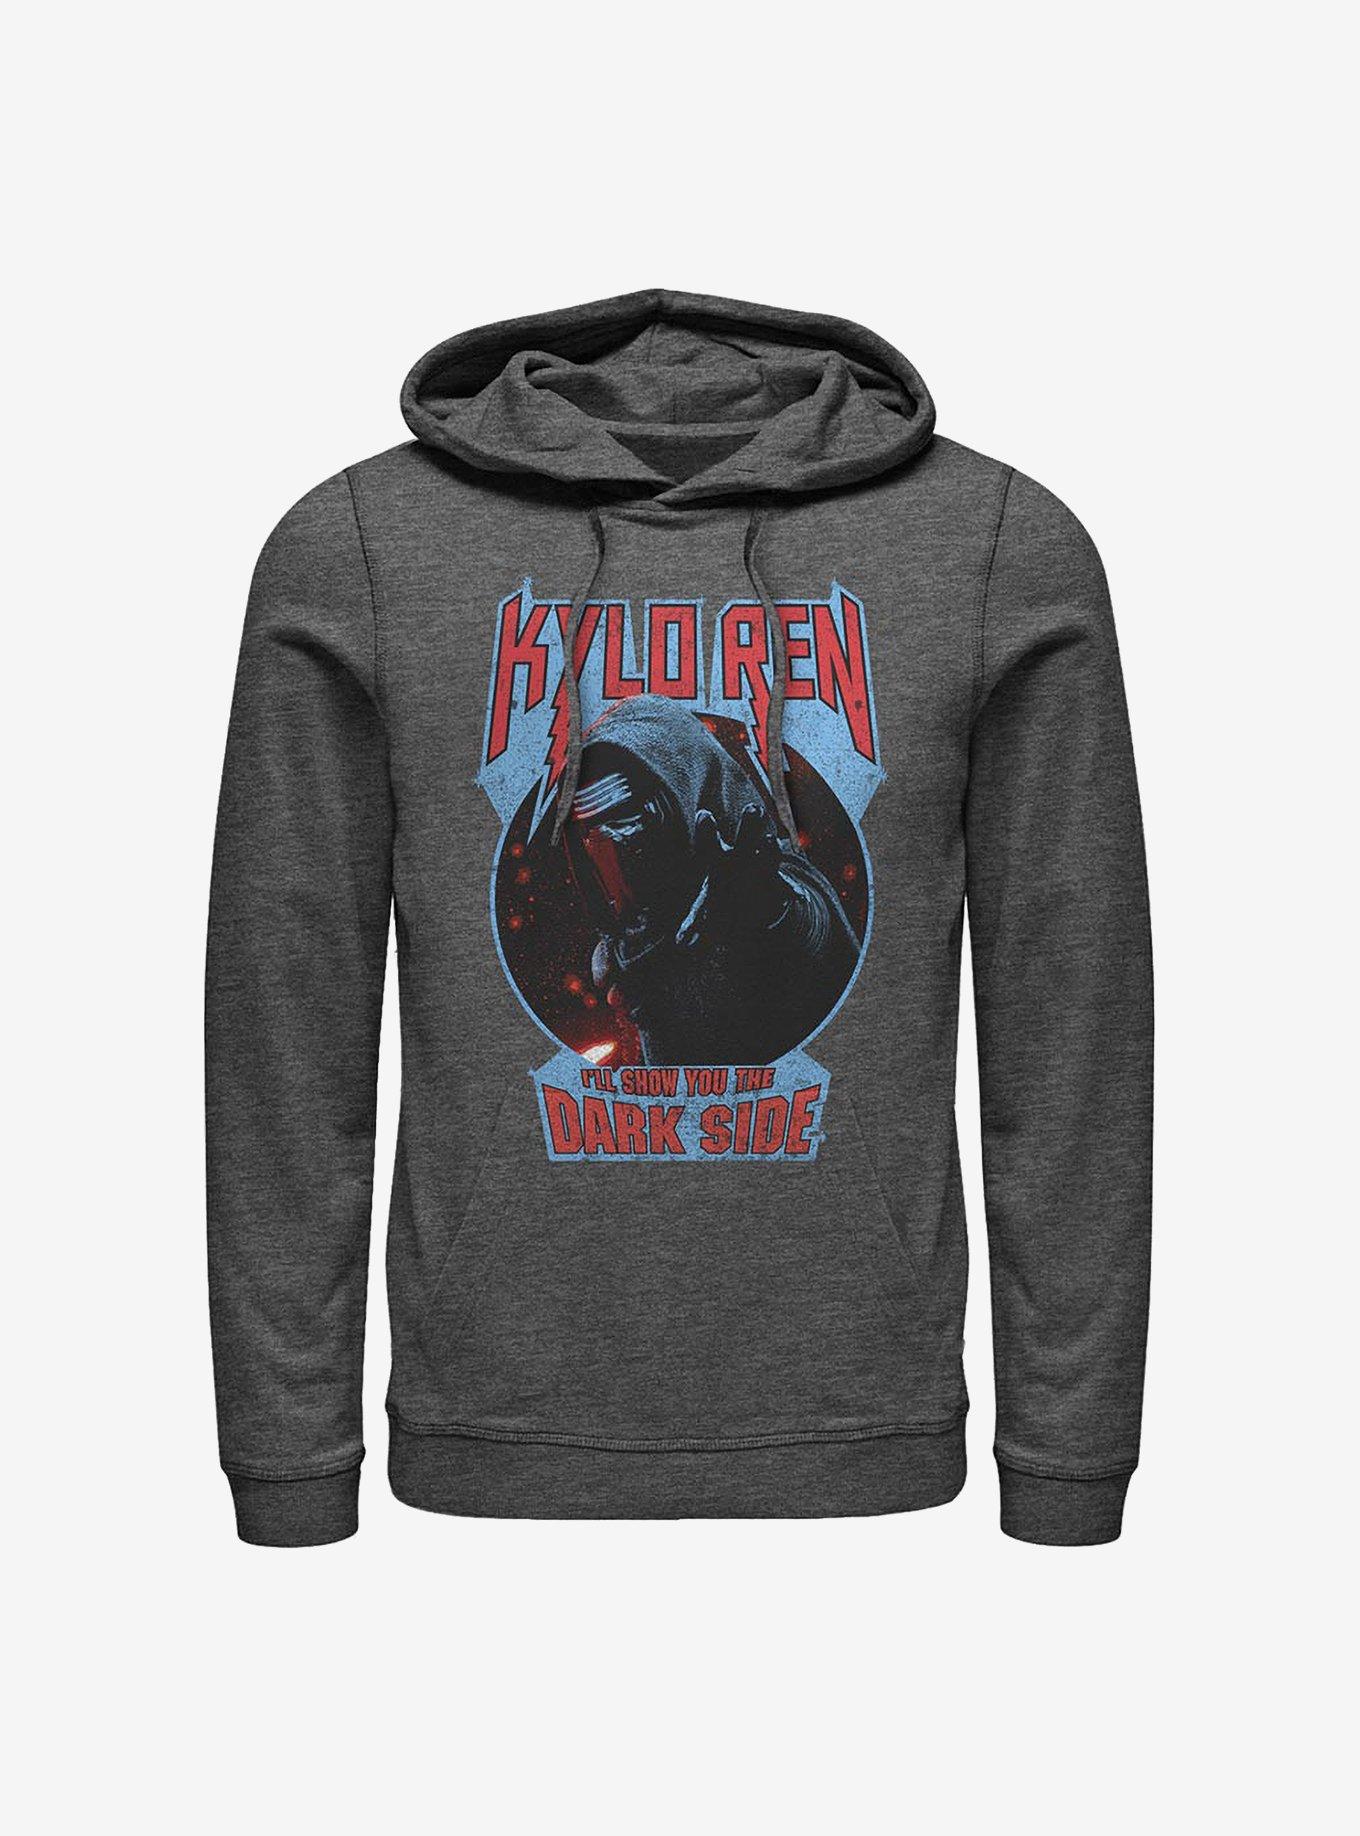 Star Wars: The Force Awakens Kylo Ren Show You The Dark Side Hoodie, CHAR HTR, hi-res